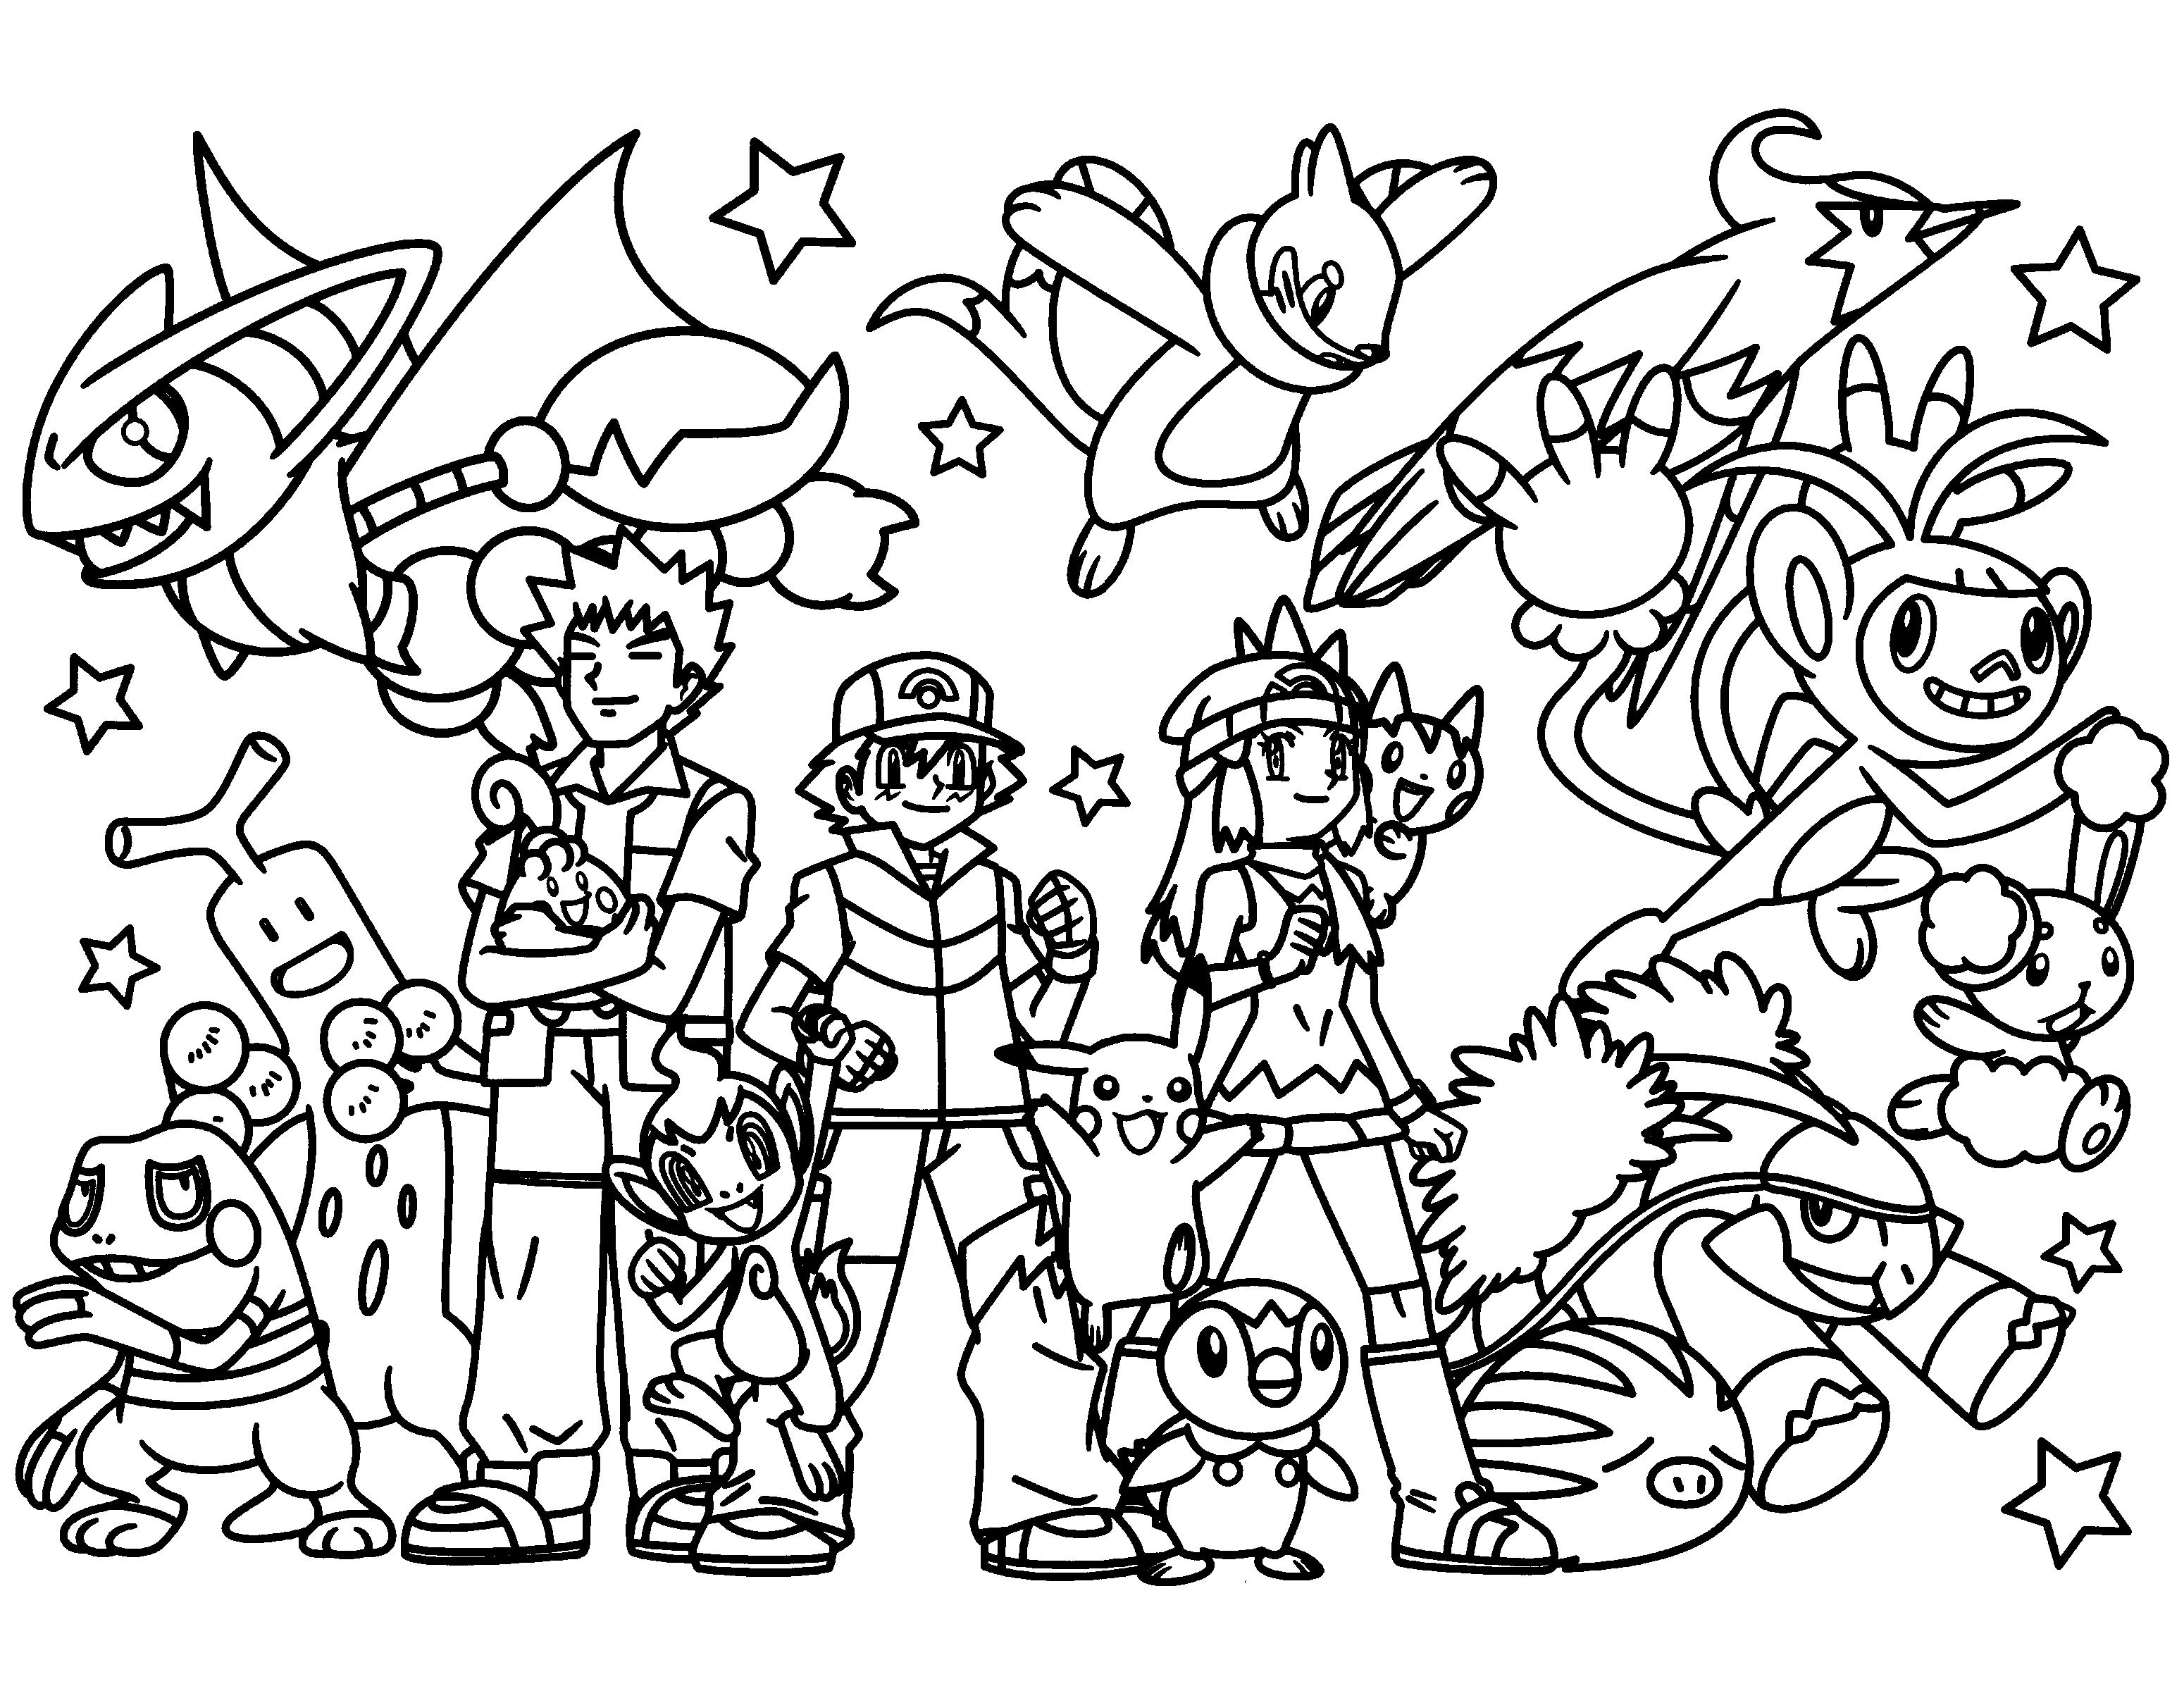 Pokemon Coloring Pages. Join your favorite Pokemon on an Adventure!